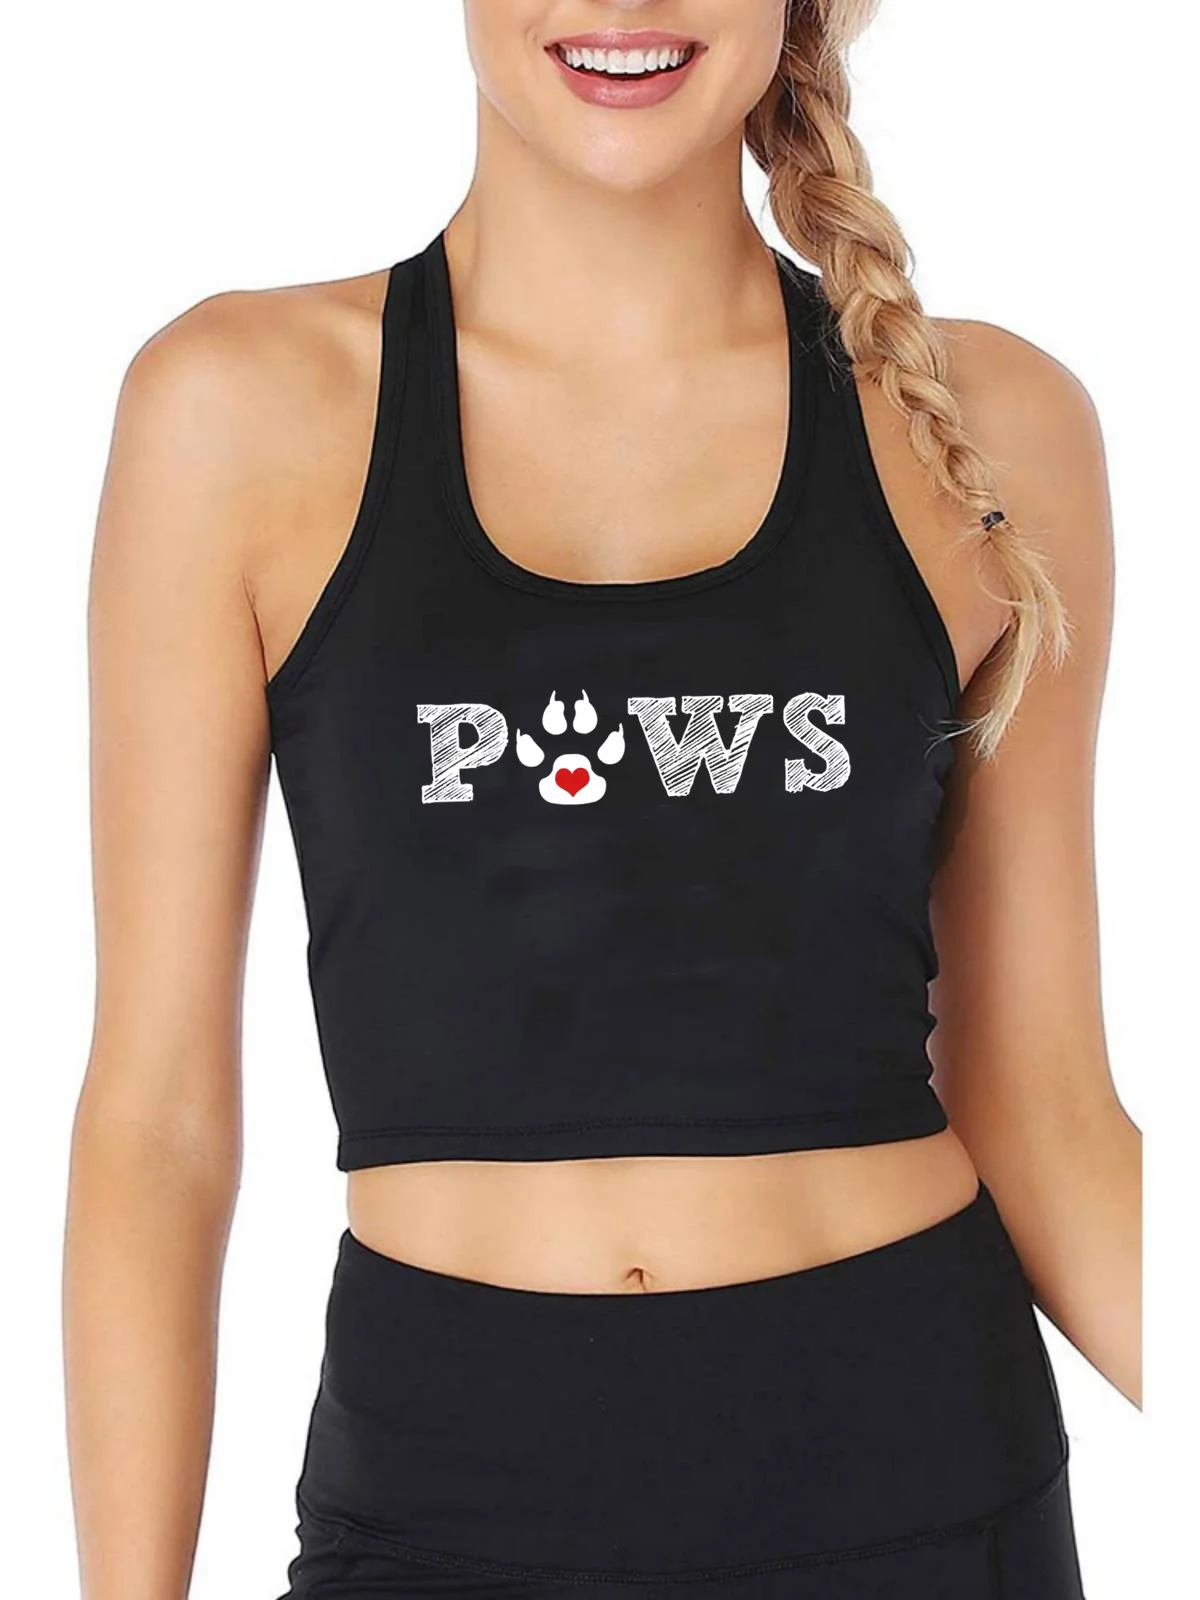 

Cat Paw Pattern POW Lettering Design Crop Top Women's Personality Sexy Slim Fit Tank Tops Gym Fitness Workout Camisole